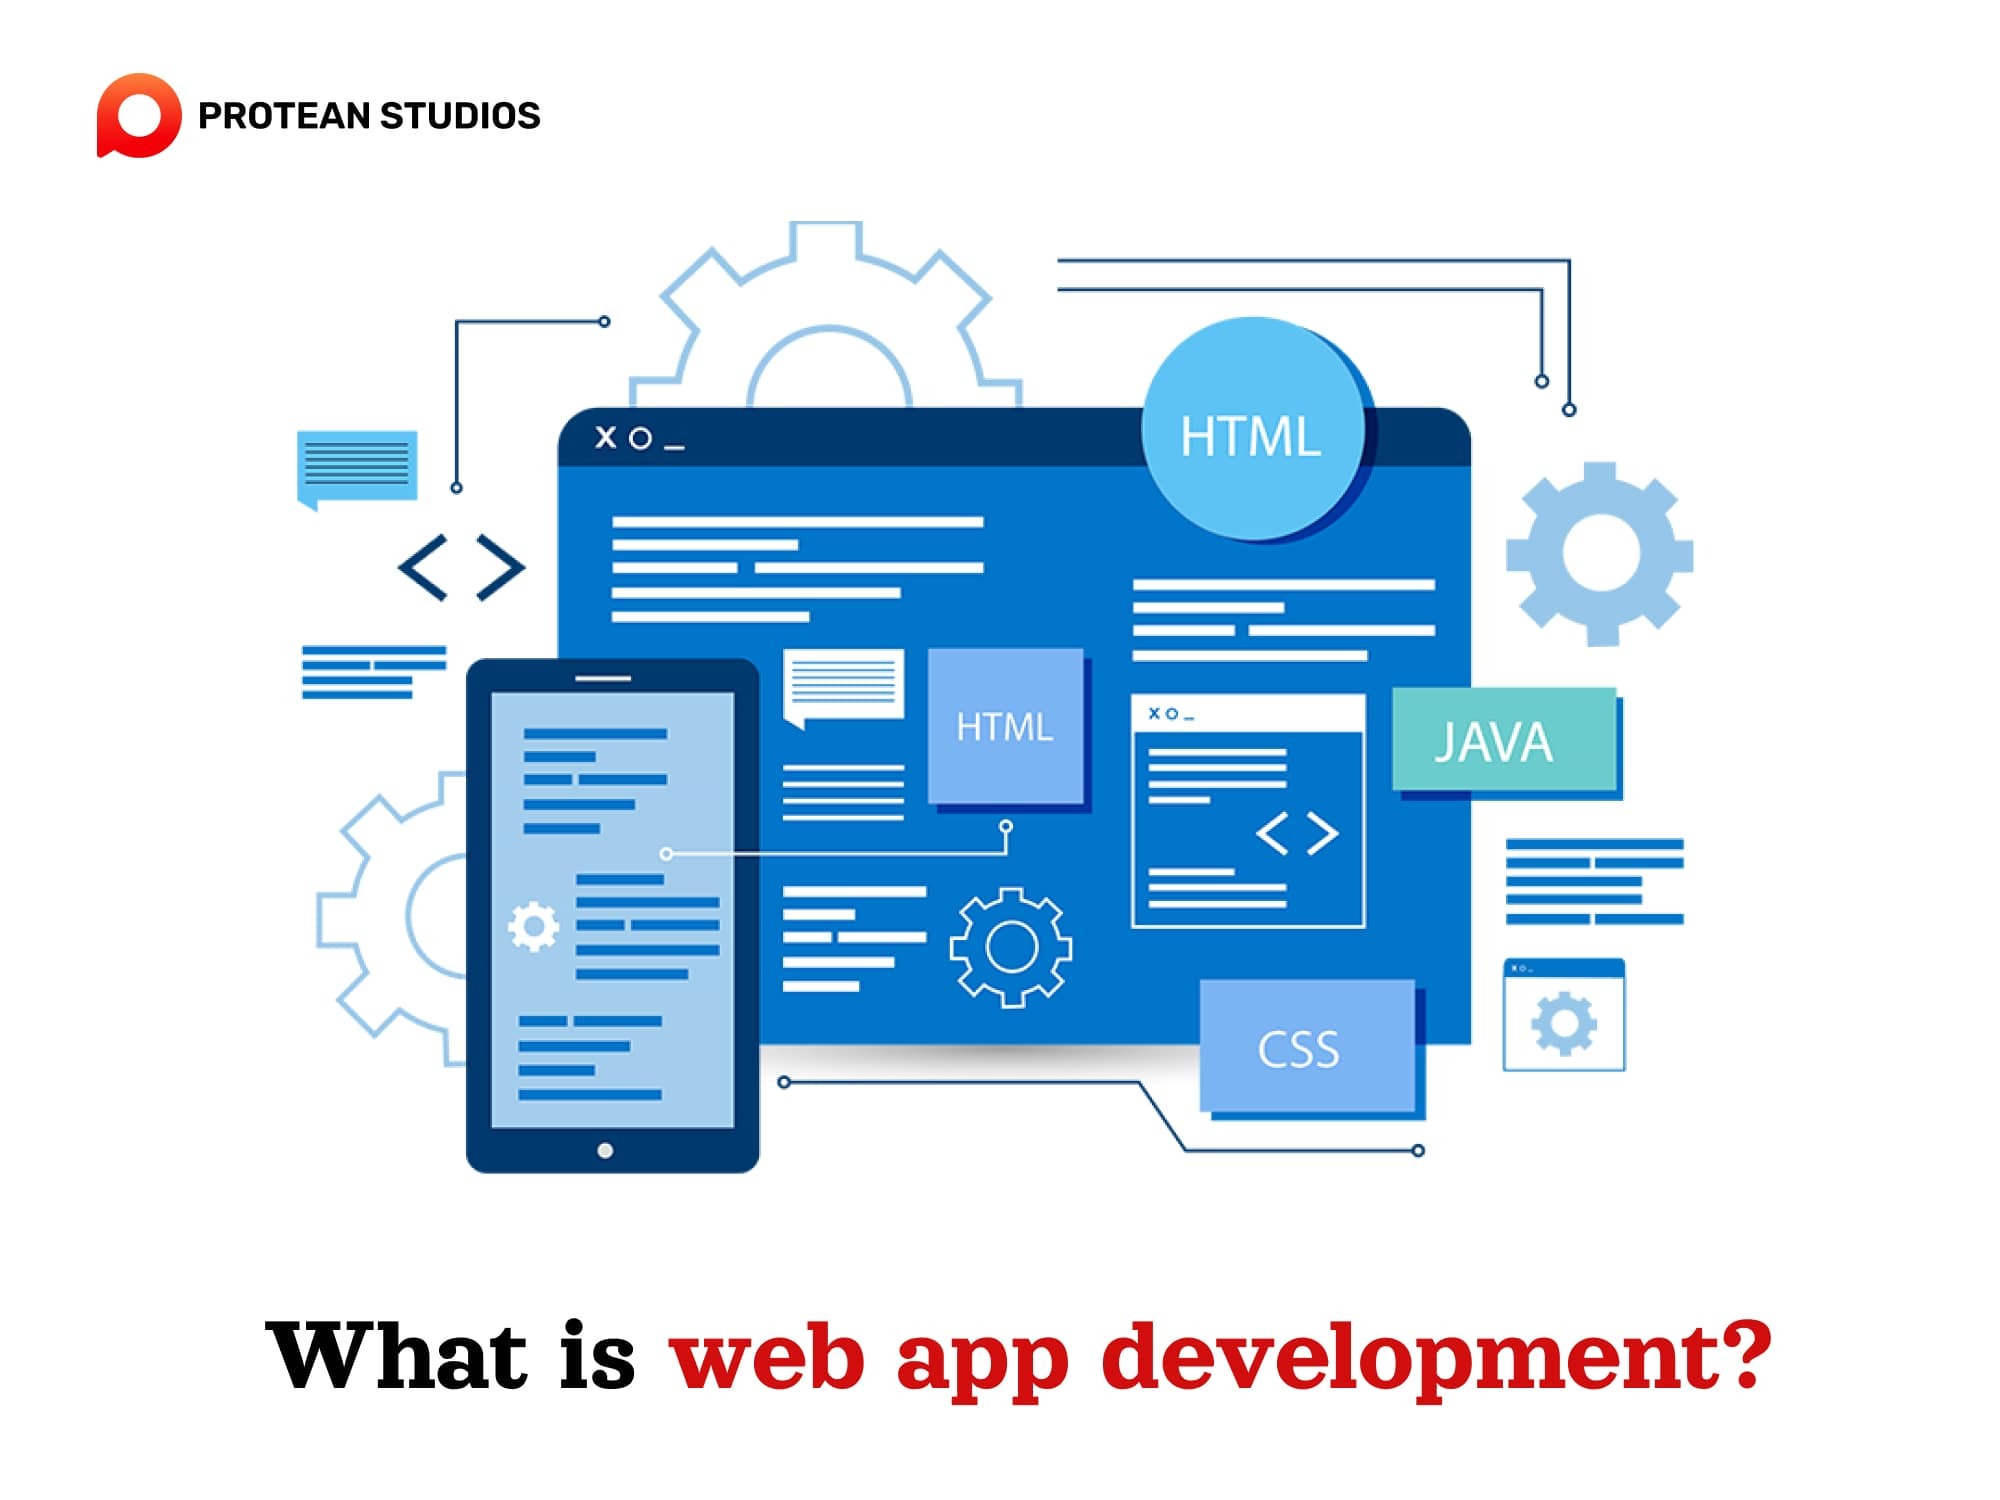 Web application development and its features